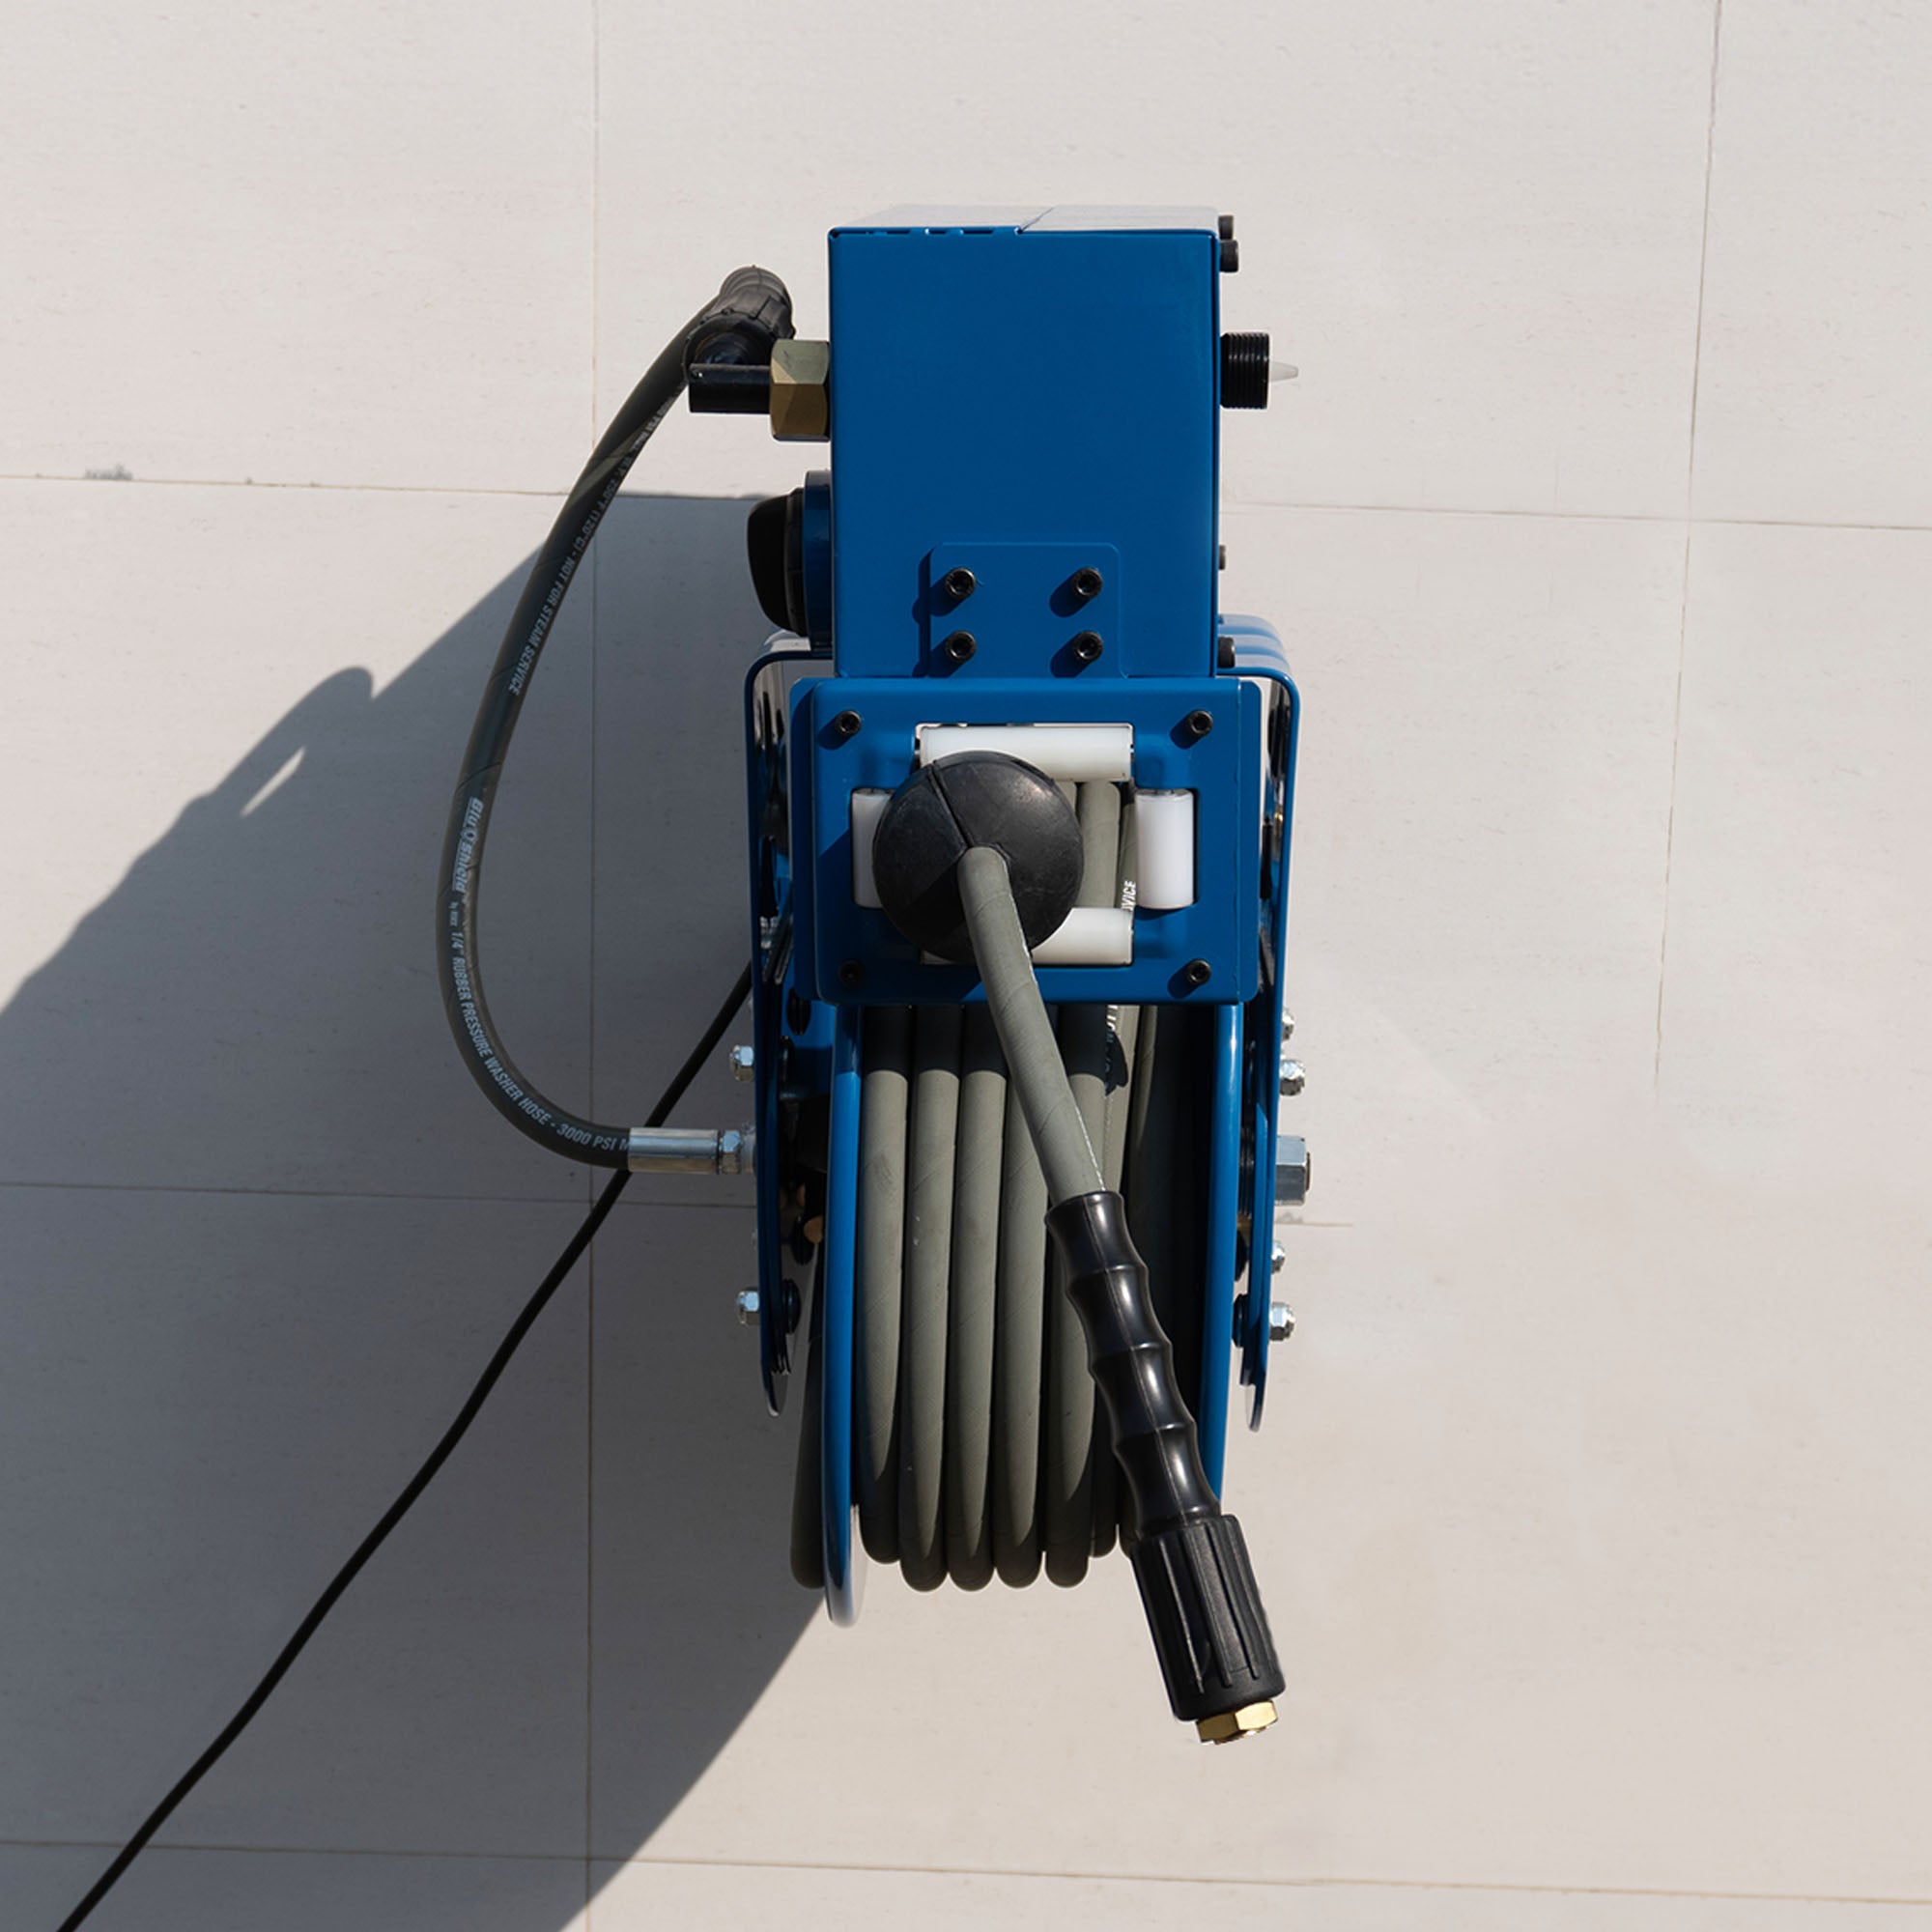 BluShield HumpBack Hose Reel with Built-in Pressure Washer